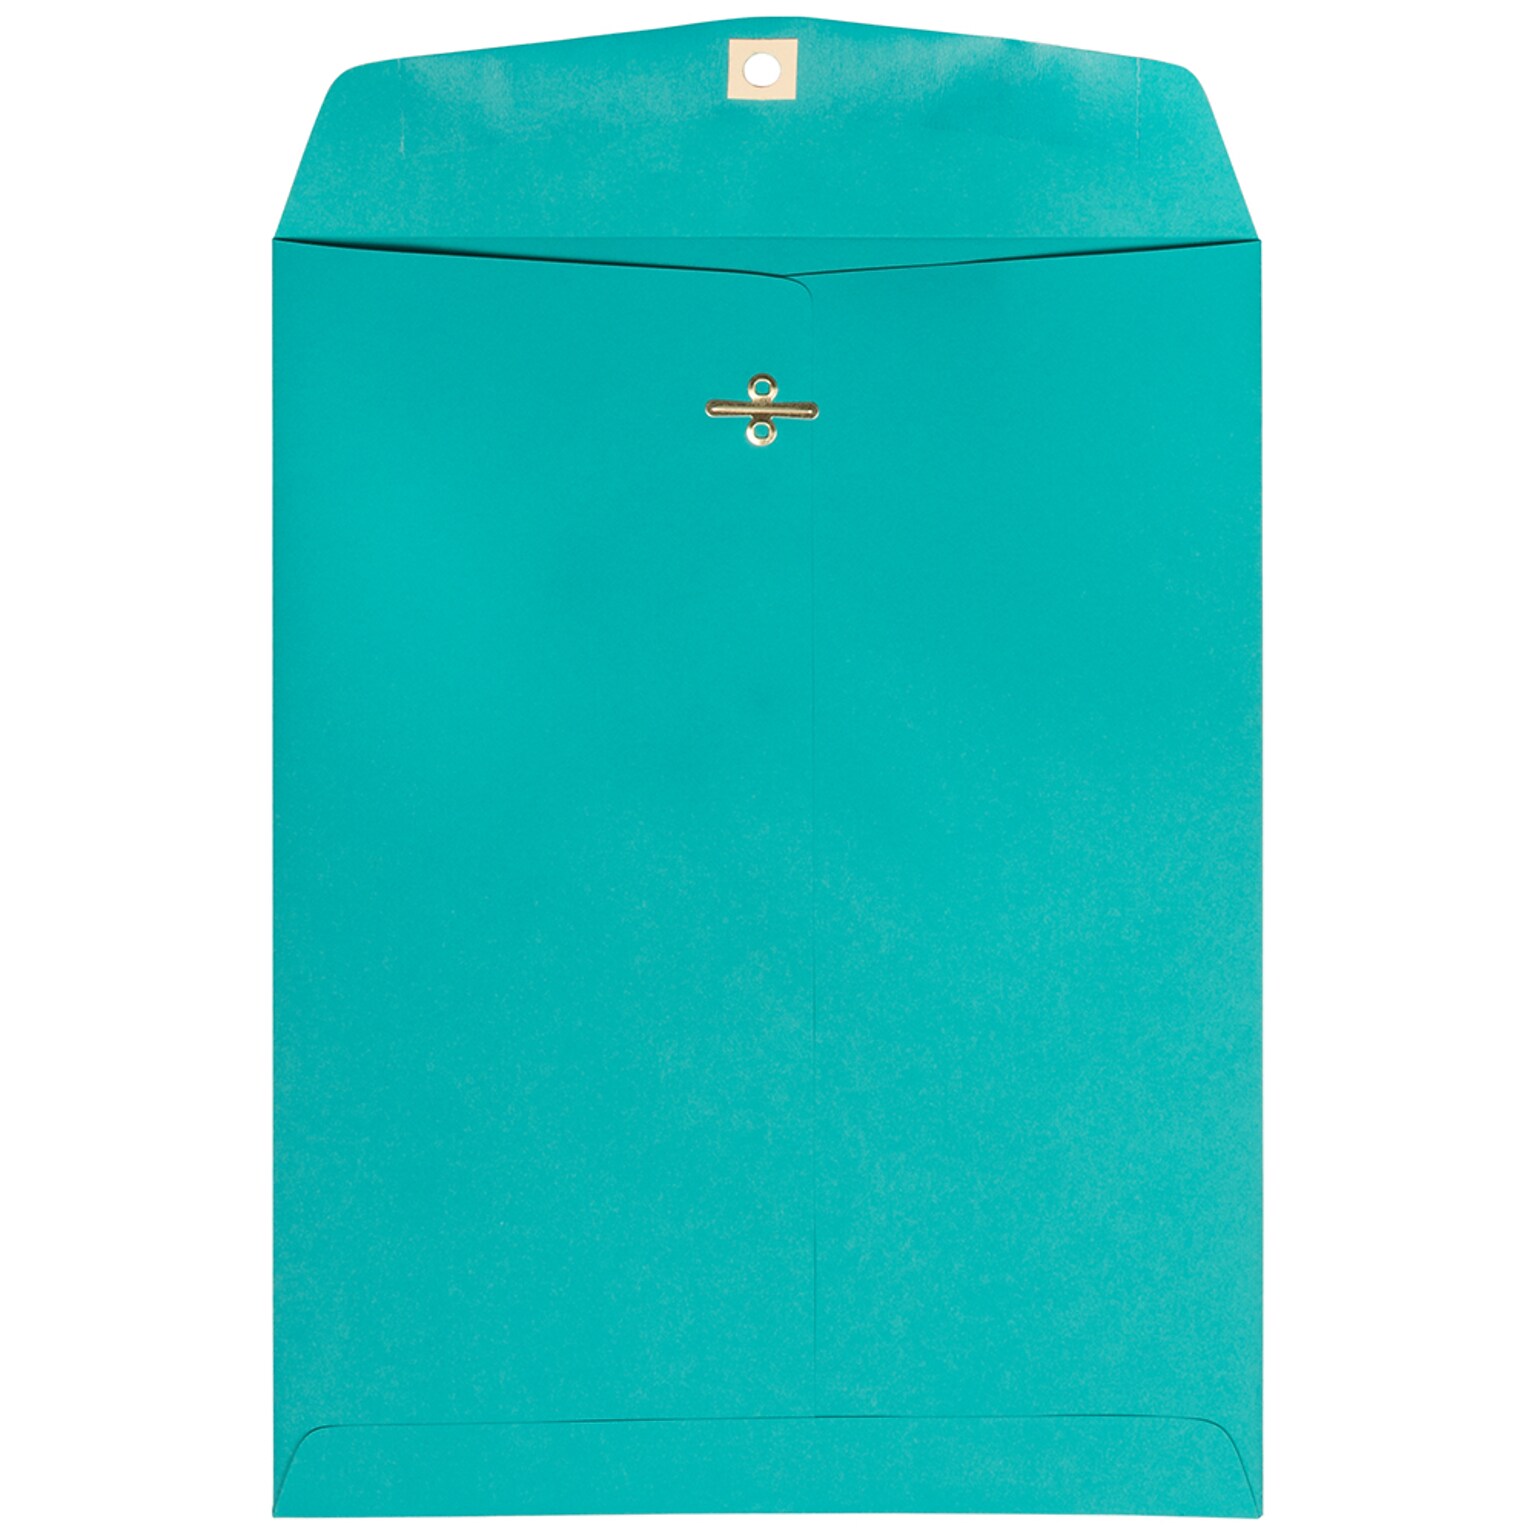 JAM Paper 9 x 12 Open End Catalog Colored Envelopes with Clasp Closure, Sea Blue Recycled, 10/Pack (900906997B)